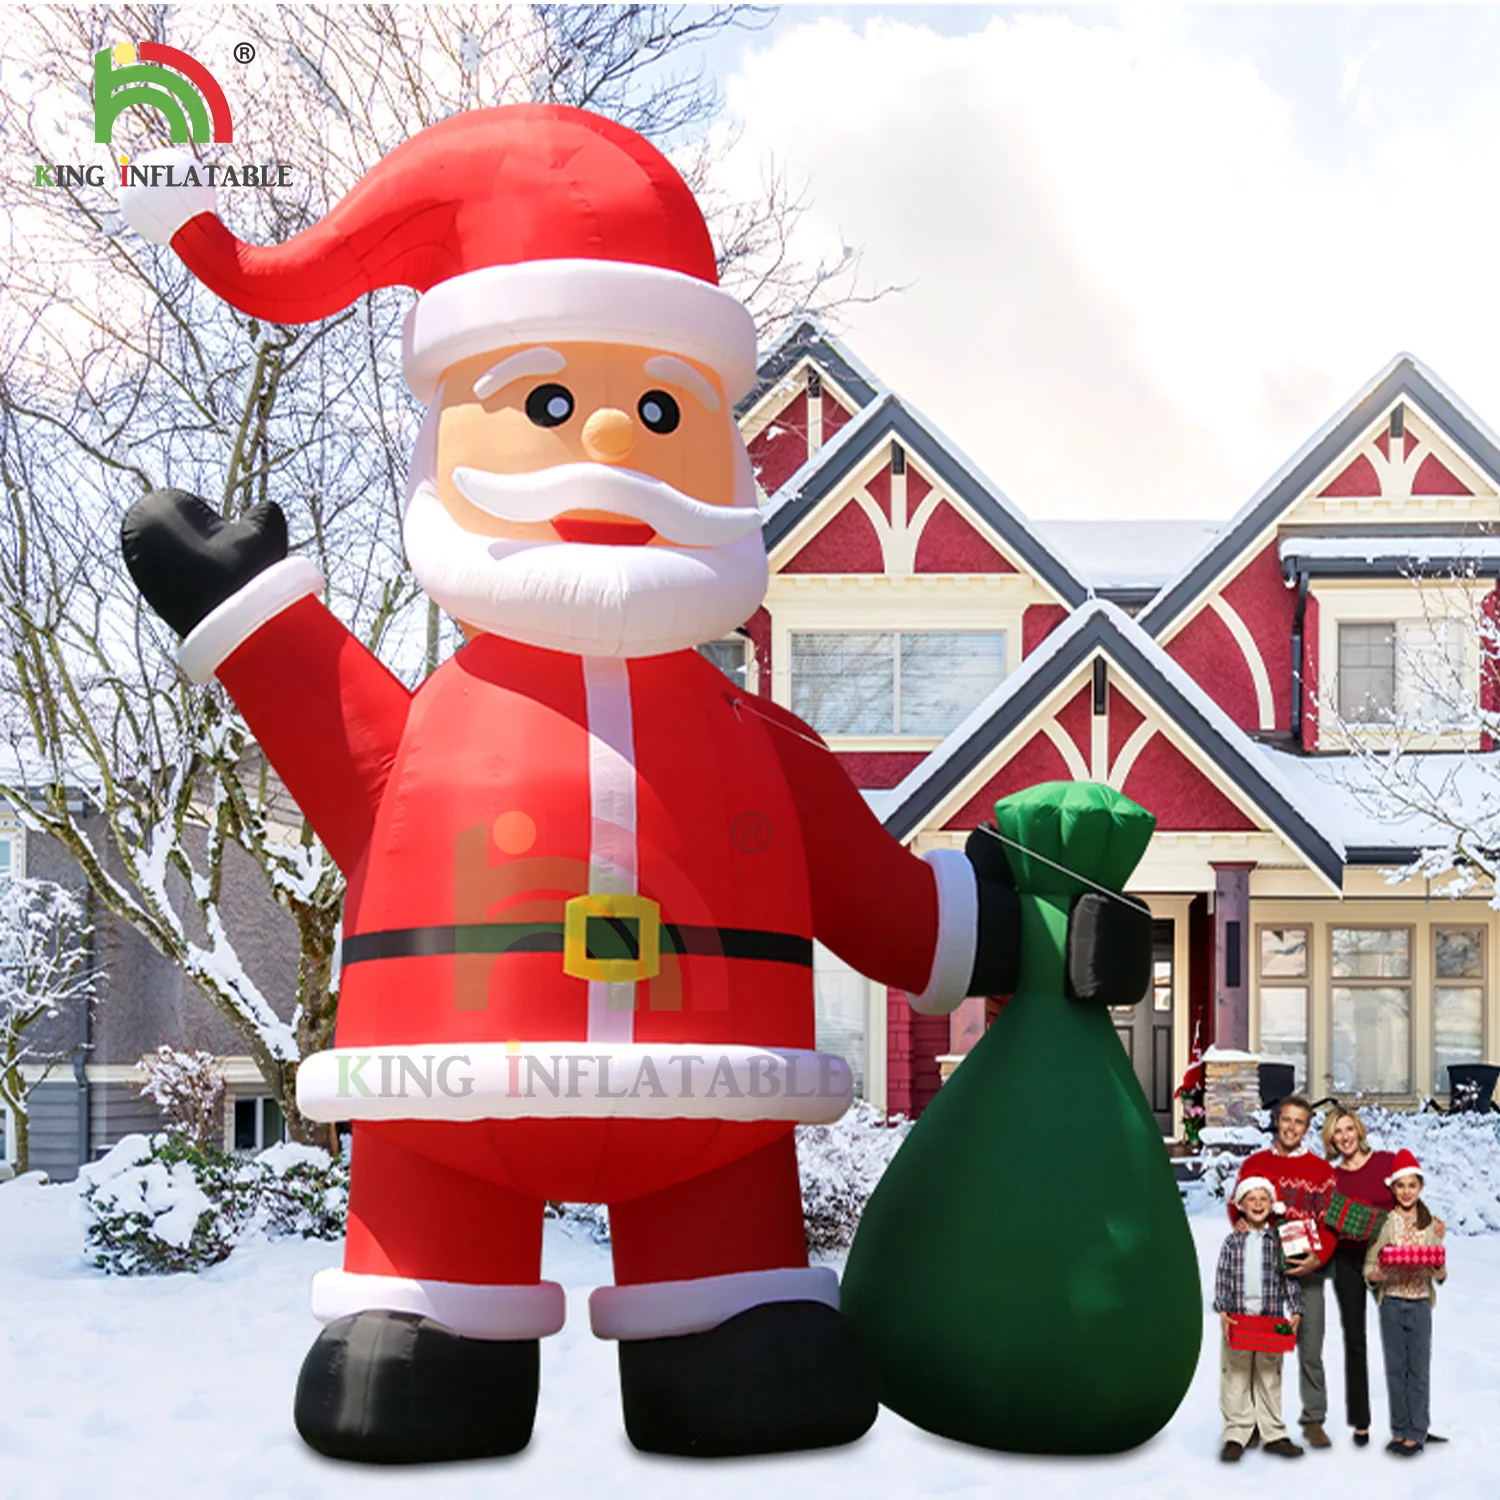 12ft giant lying commercial inflatable santa claus with led lights lovely father christmas for outdoor decorations 20/26/33ft Giant Inflatable Santa Claus Outdoors Christmas Father Decorations Festival Party Xmas Celebration With Blower Oxford